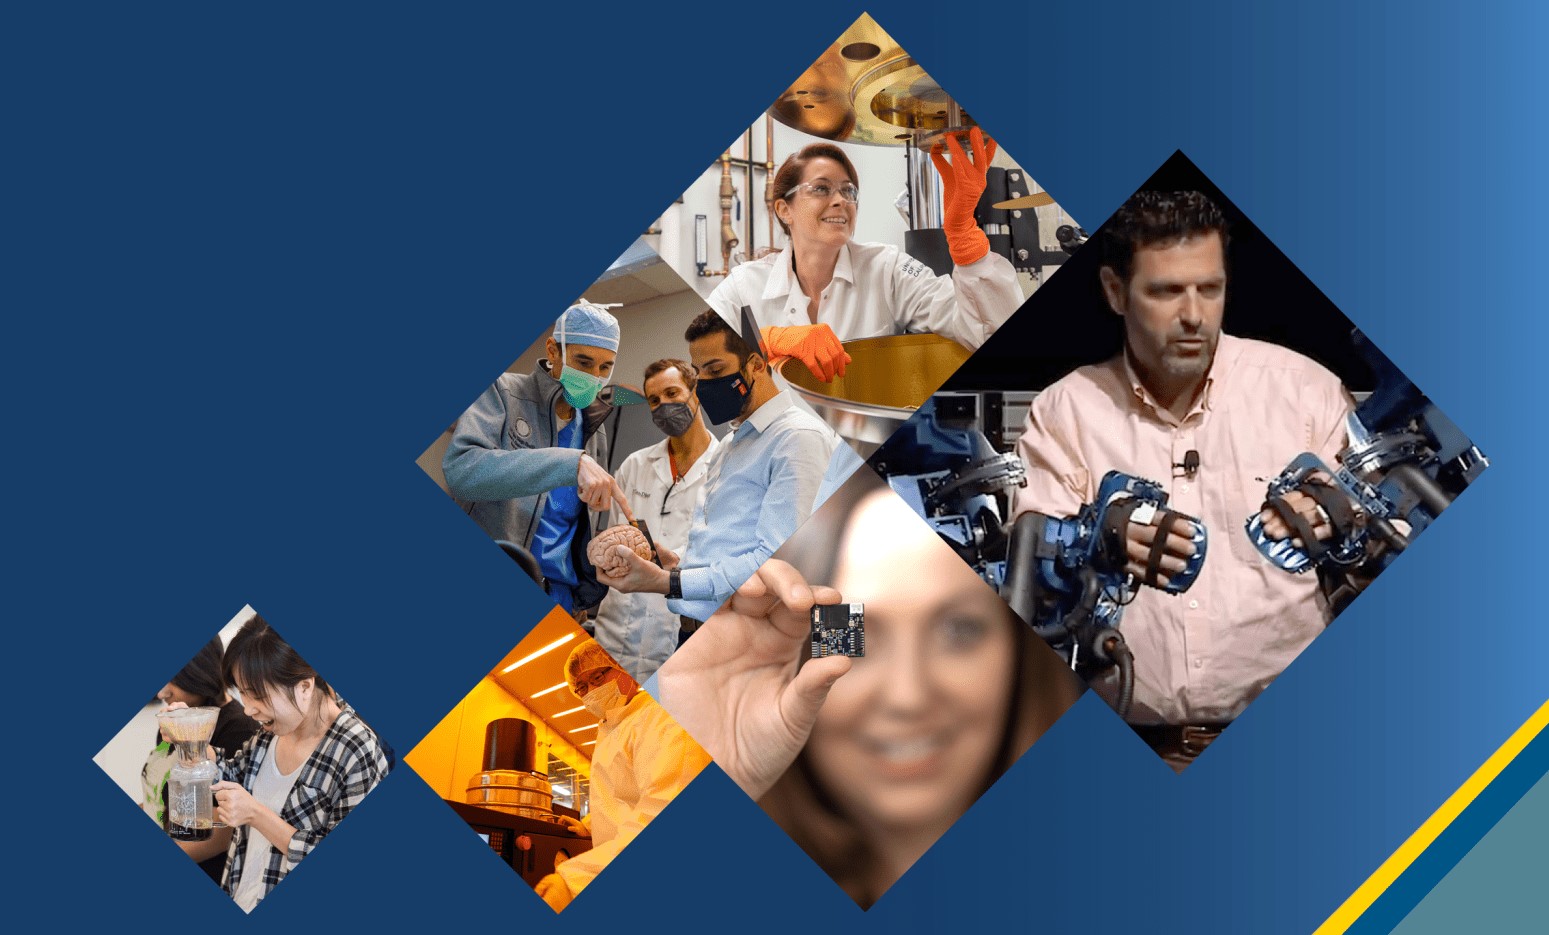 Blue background with diamond shaped photos of researchers and engineers